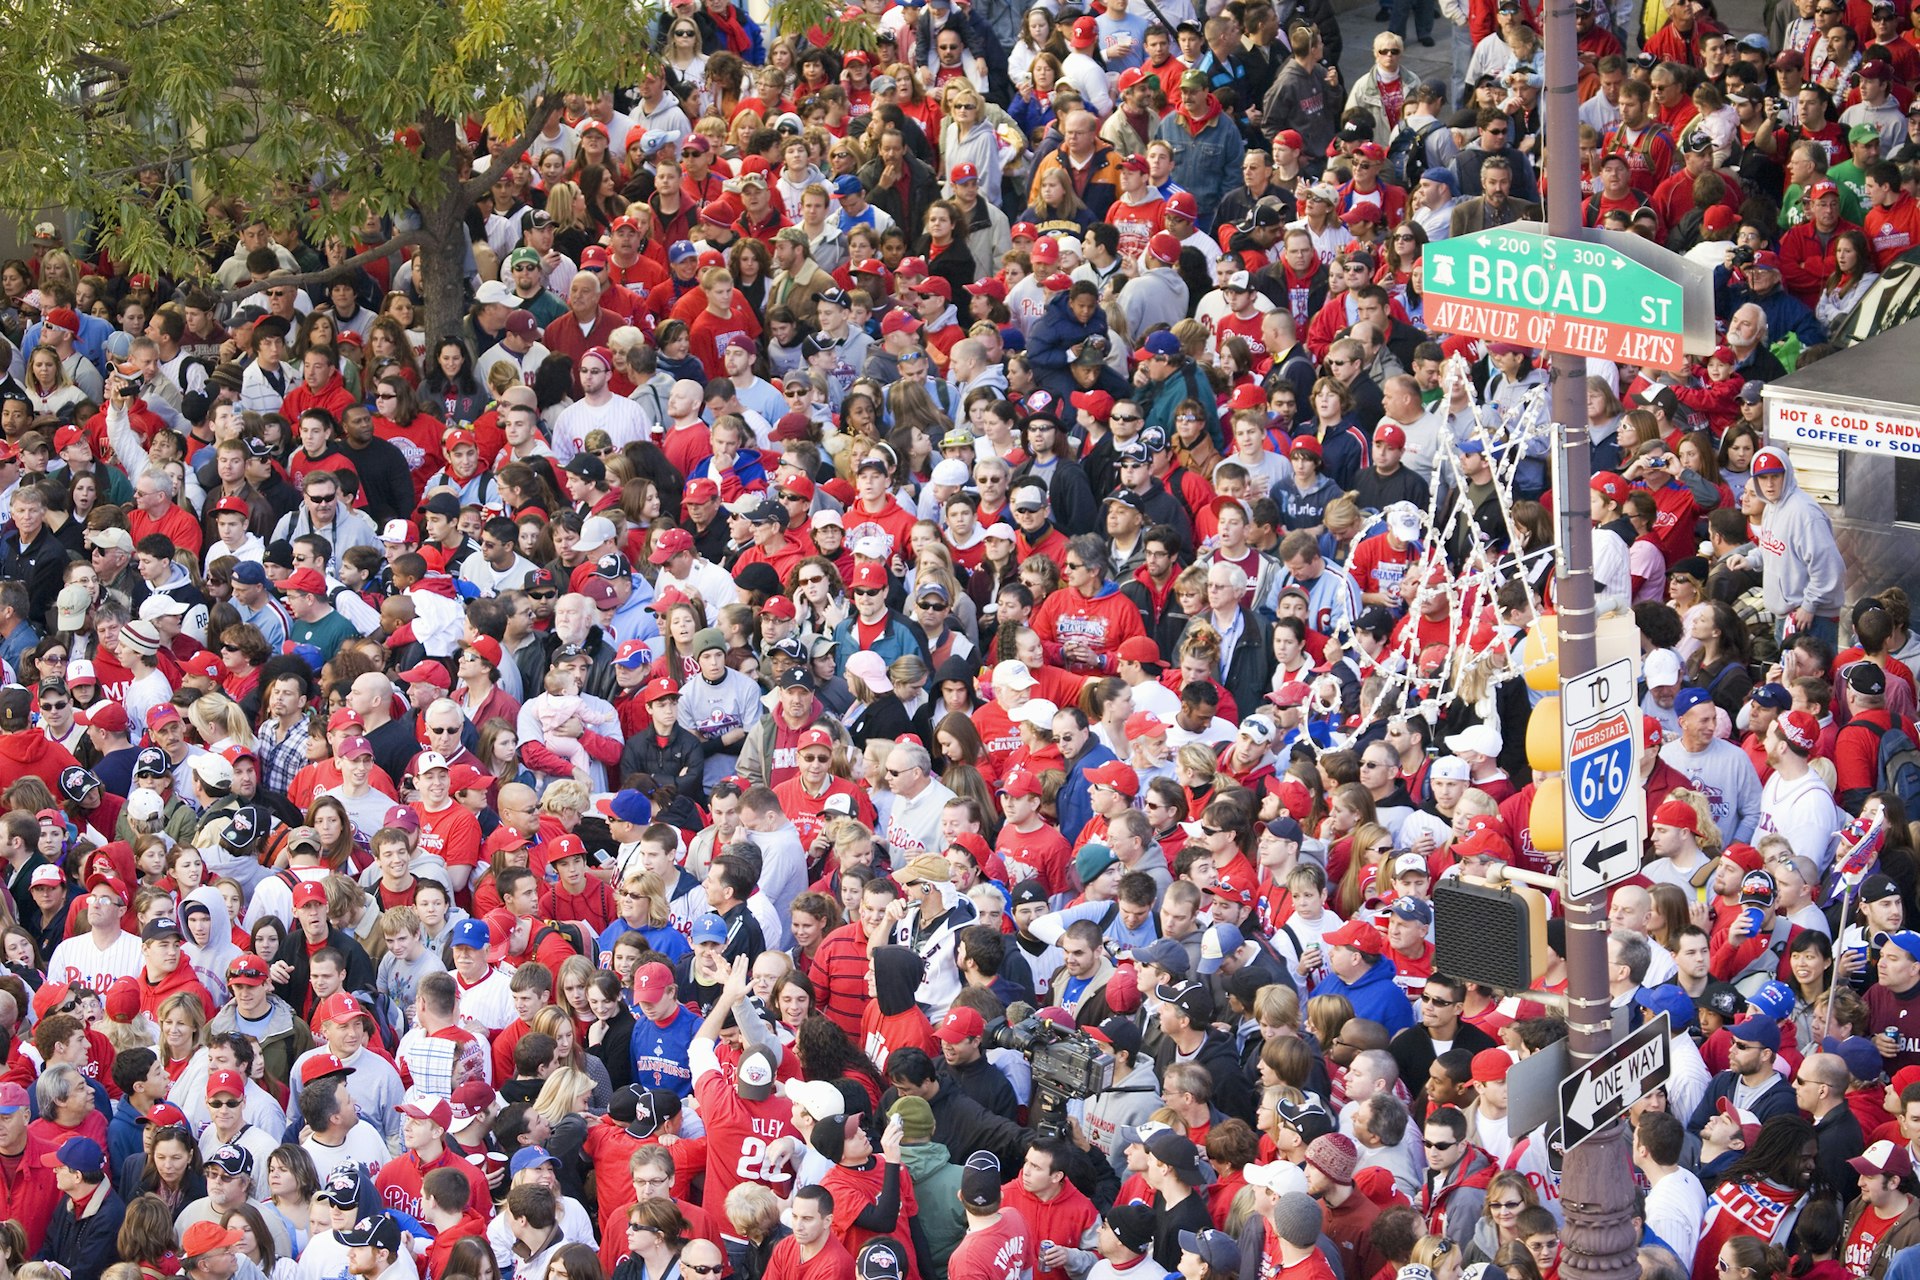 Philadelphia Phillies fans, mainly dressed in red, crowd together down a street in celebration of winning the World Series